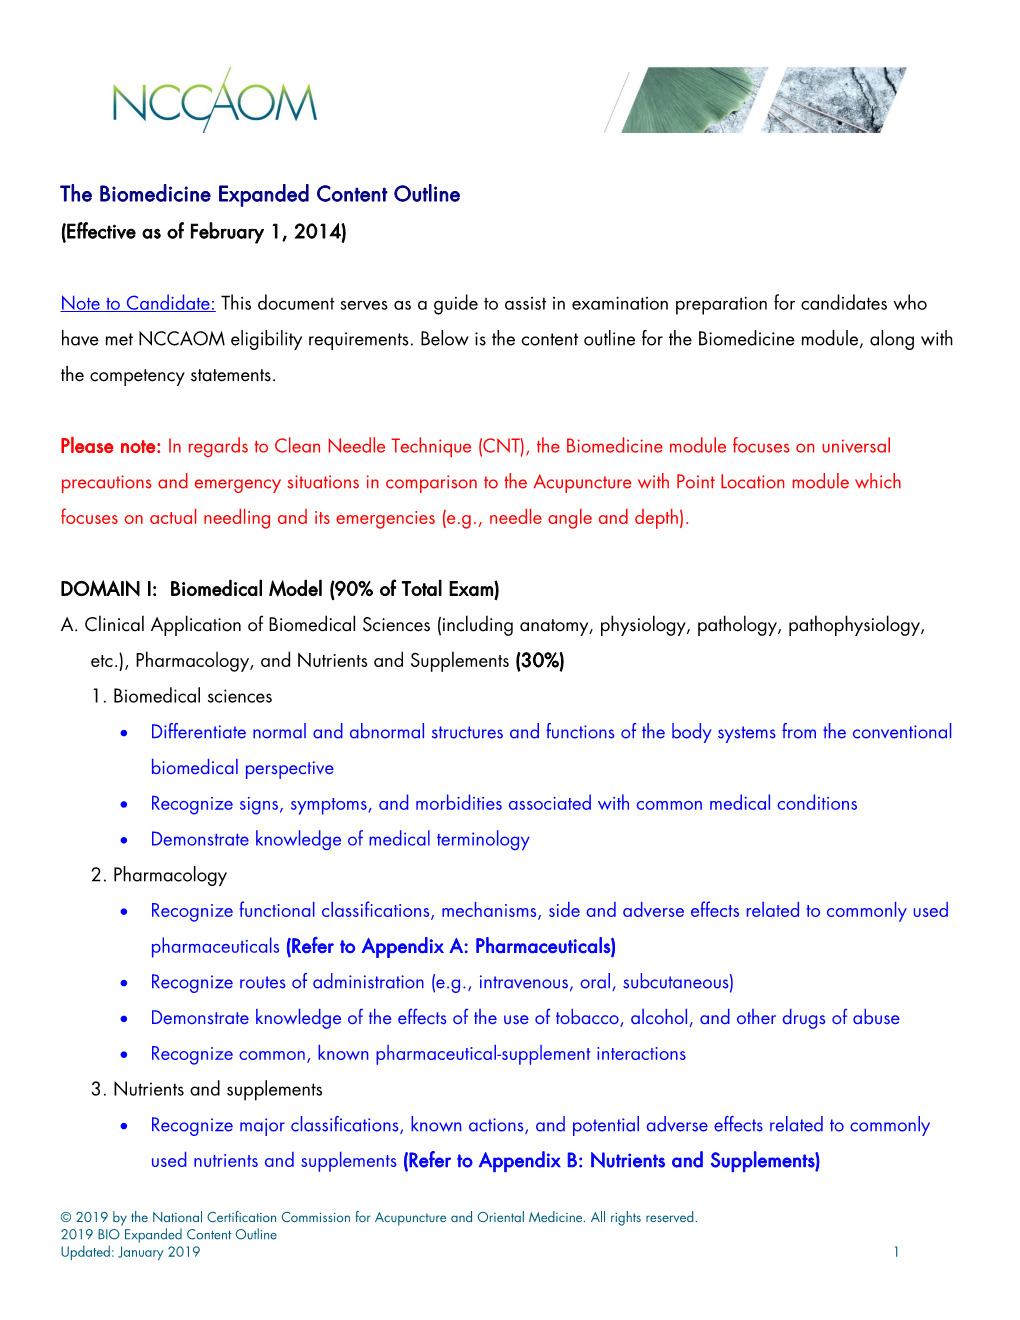 The Biomedicine Expanded Content Outline (Effective As of February 1, 2014)